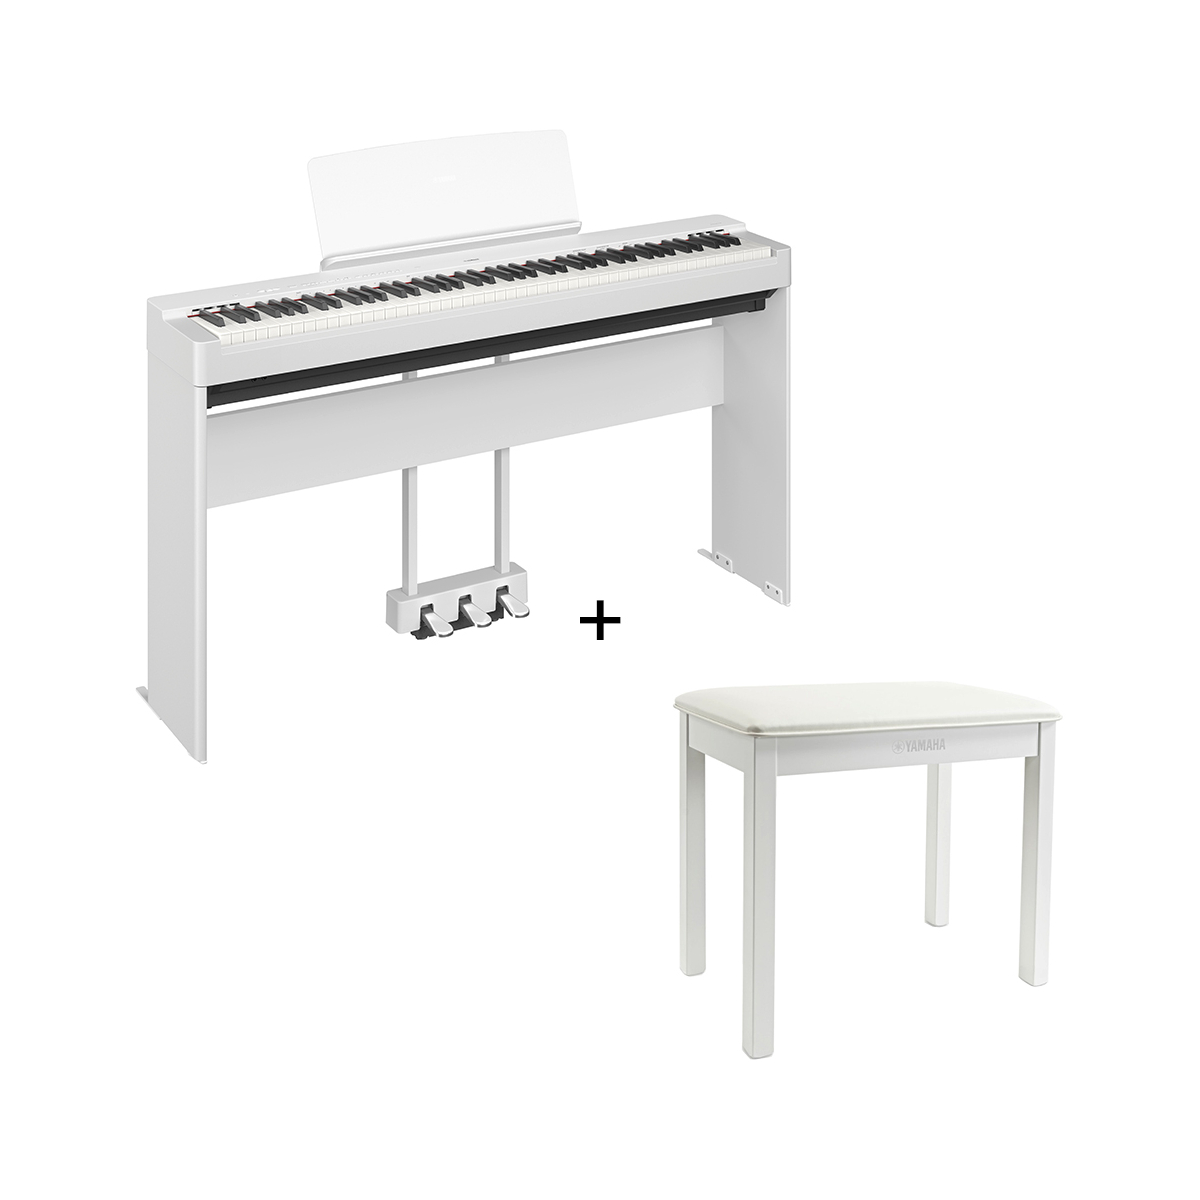 Packs Claviers et Synthé - Yamaha - Pack P-225 (Blanc) + Stand...